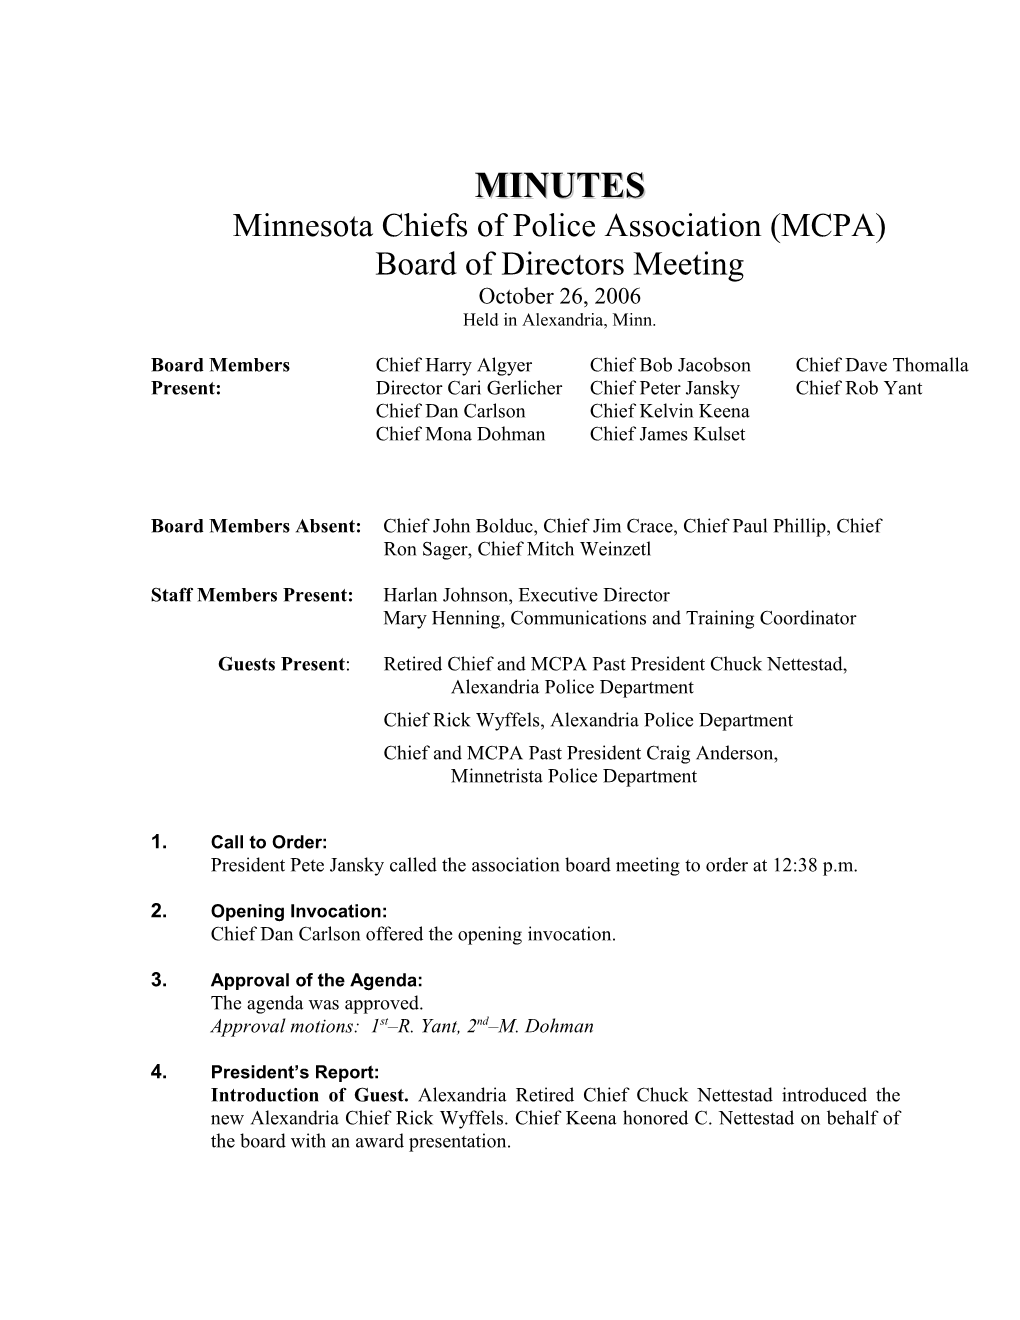 Minutes Minnesota Chiefs of Police Associationjan. 19, 2006 Board Meeting Page 1 of 6